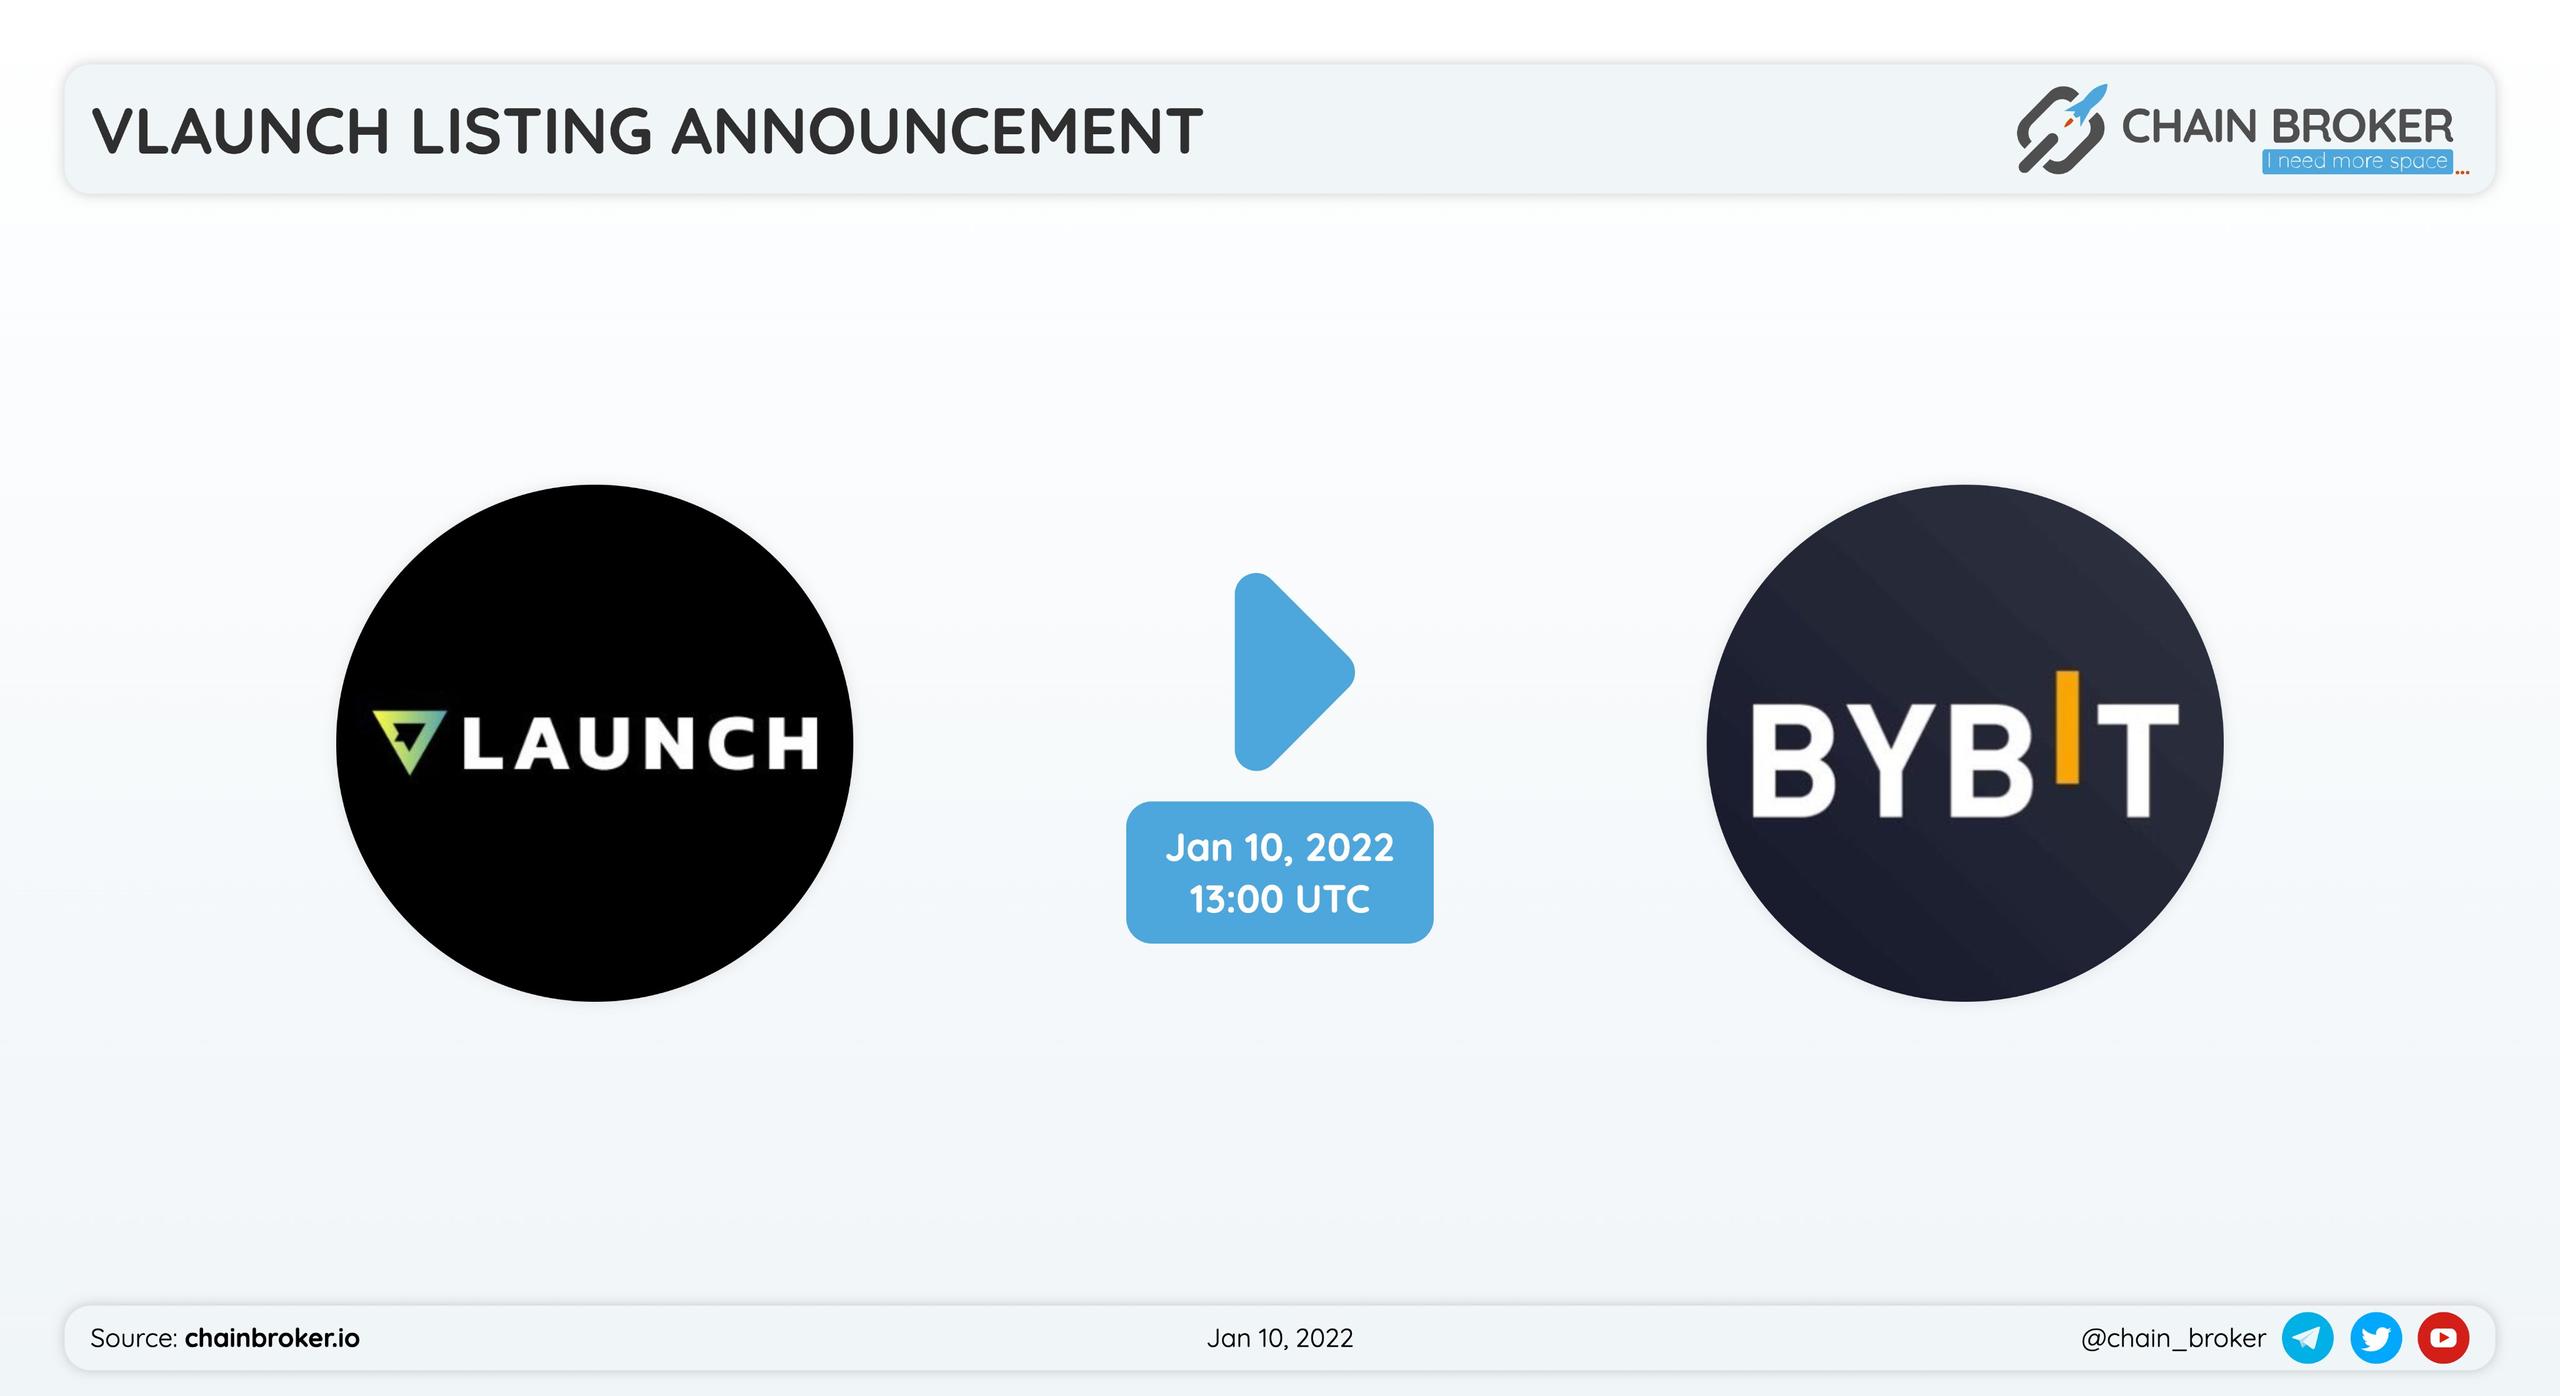 VLaunch has announced future listing on Bybit